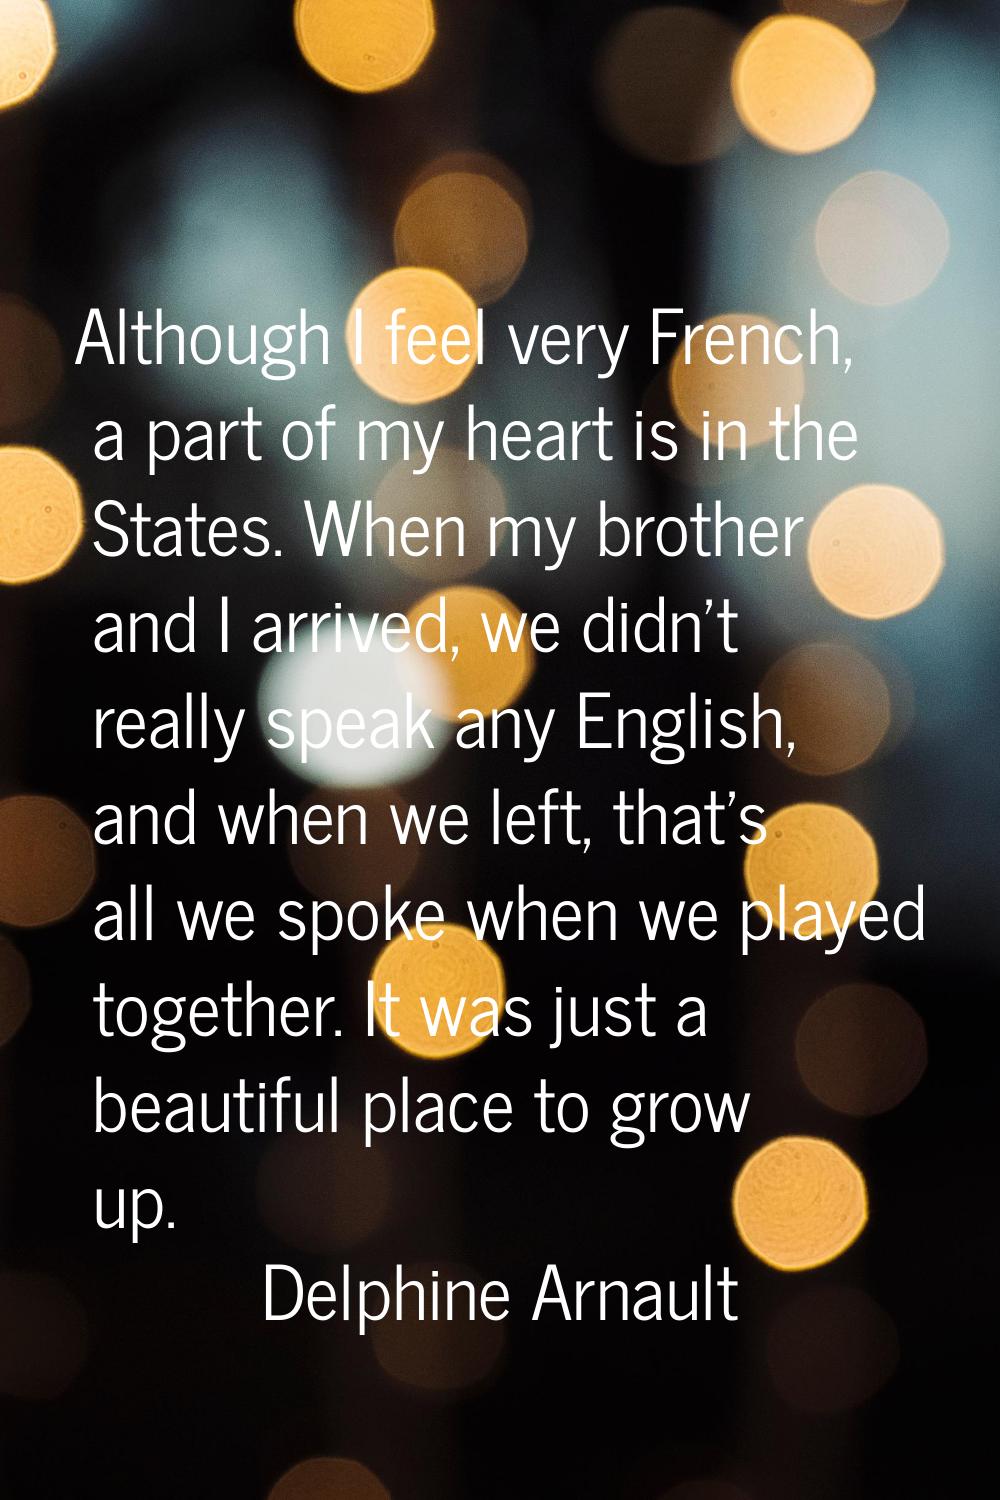 Although I feel very French, a part of my heart is in the States. When my brother and I arrived, we